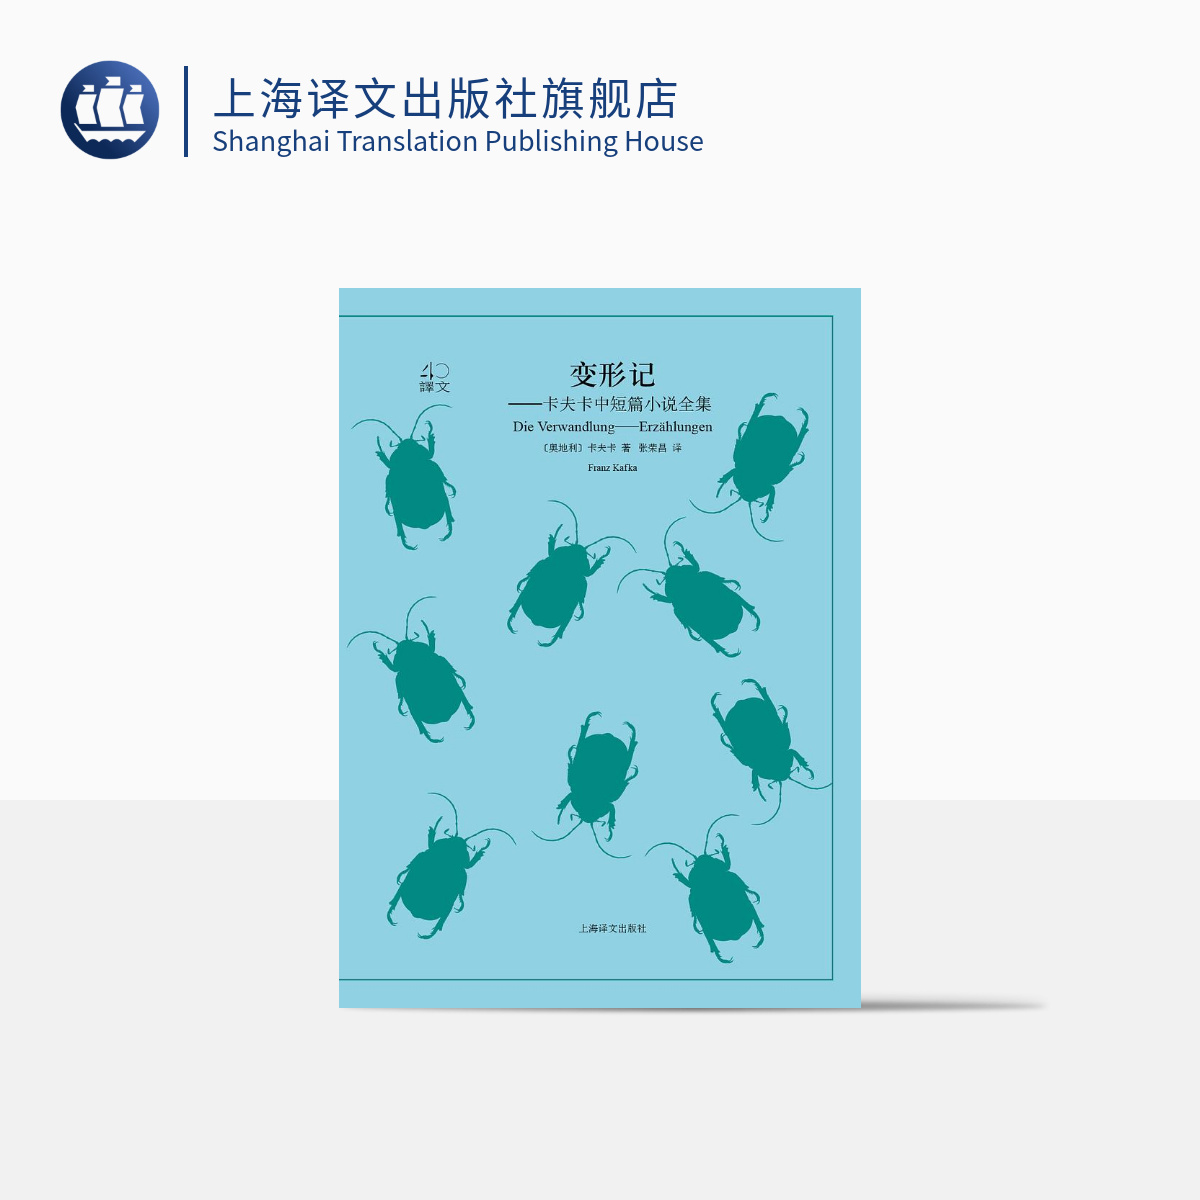 Metamorphology Austria] Kafka translation 40 series Chang Jung-chang translation of the original Fiction Classic Literary World Classics Famous students Recommended to read Shanghai translation Press